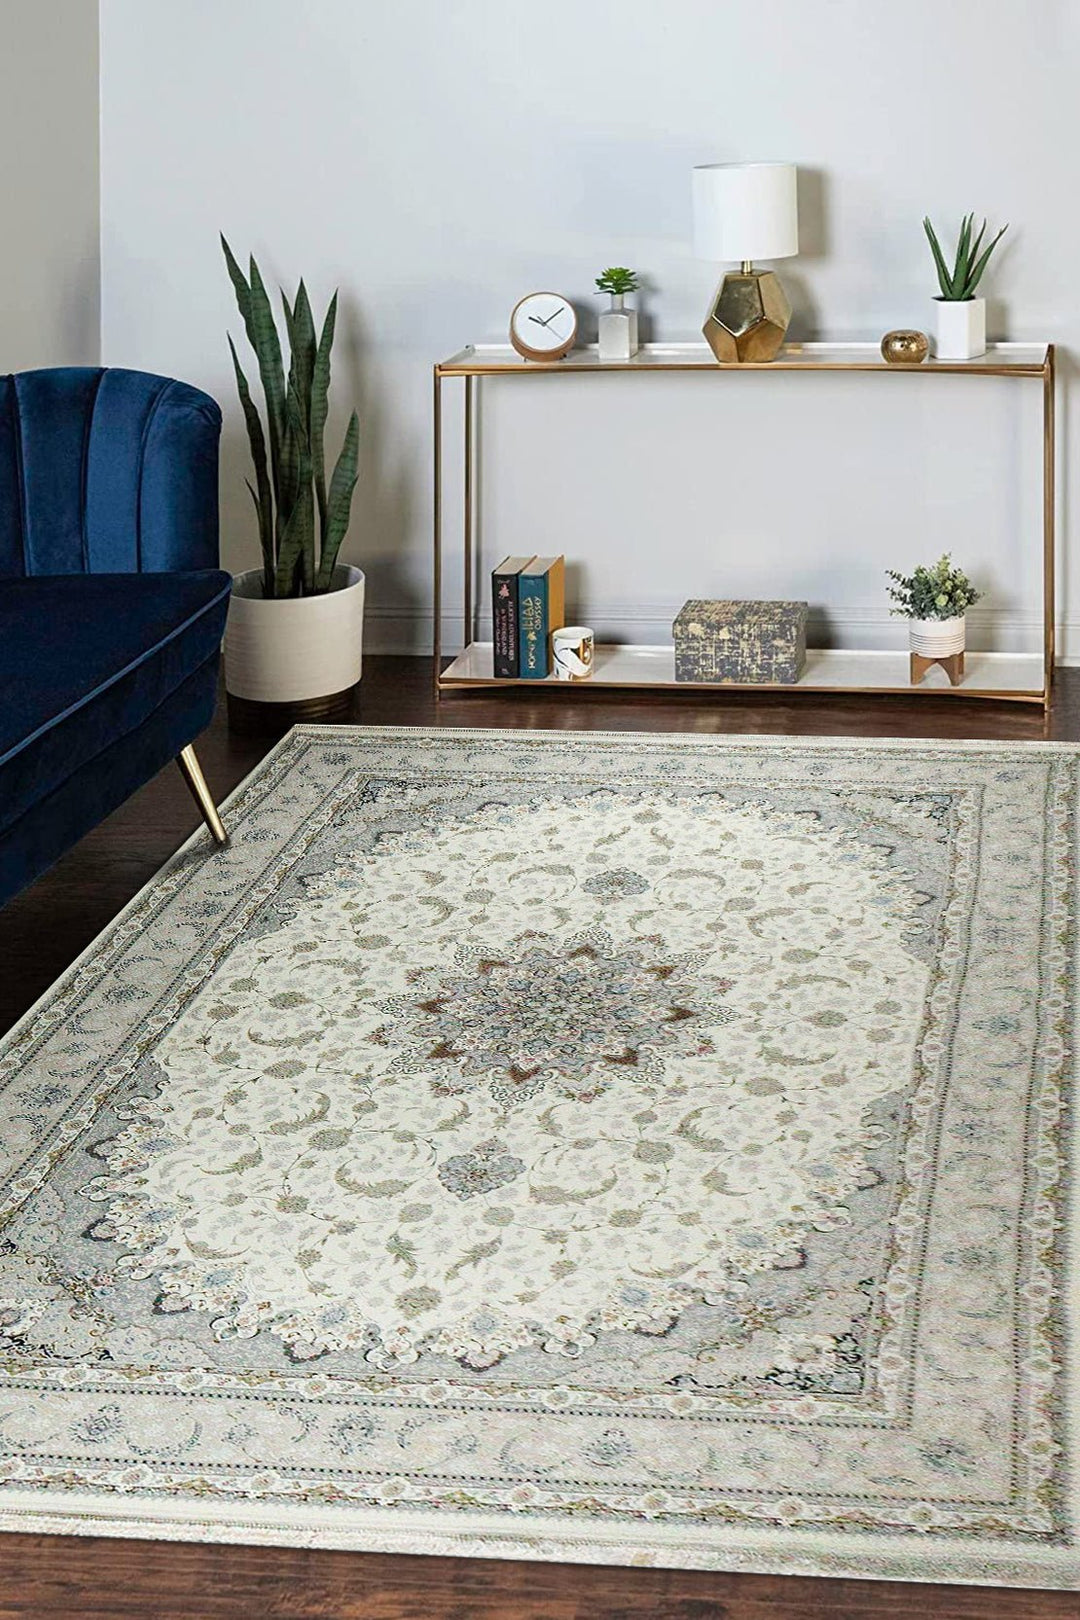 Iranian Premium Quality Authentic 1500 Rug - 8.2 x 11.4 FT - Cream - Resilient Construction for Long-Lasting Use - V Surfaces